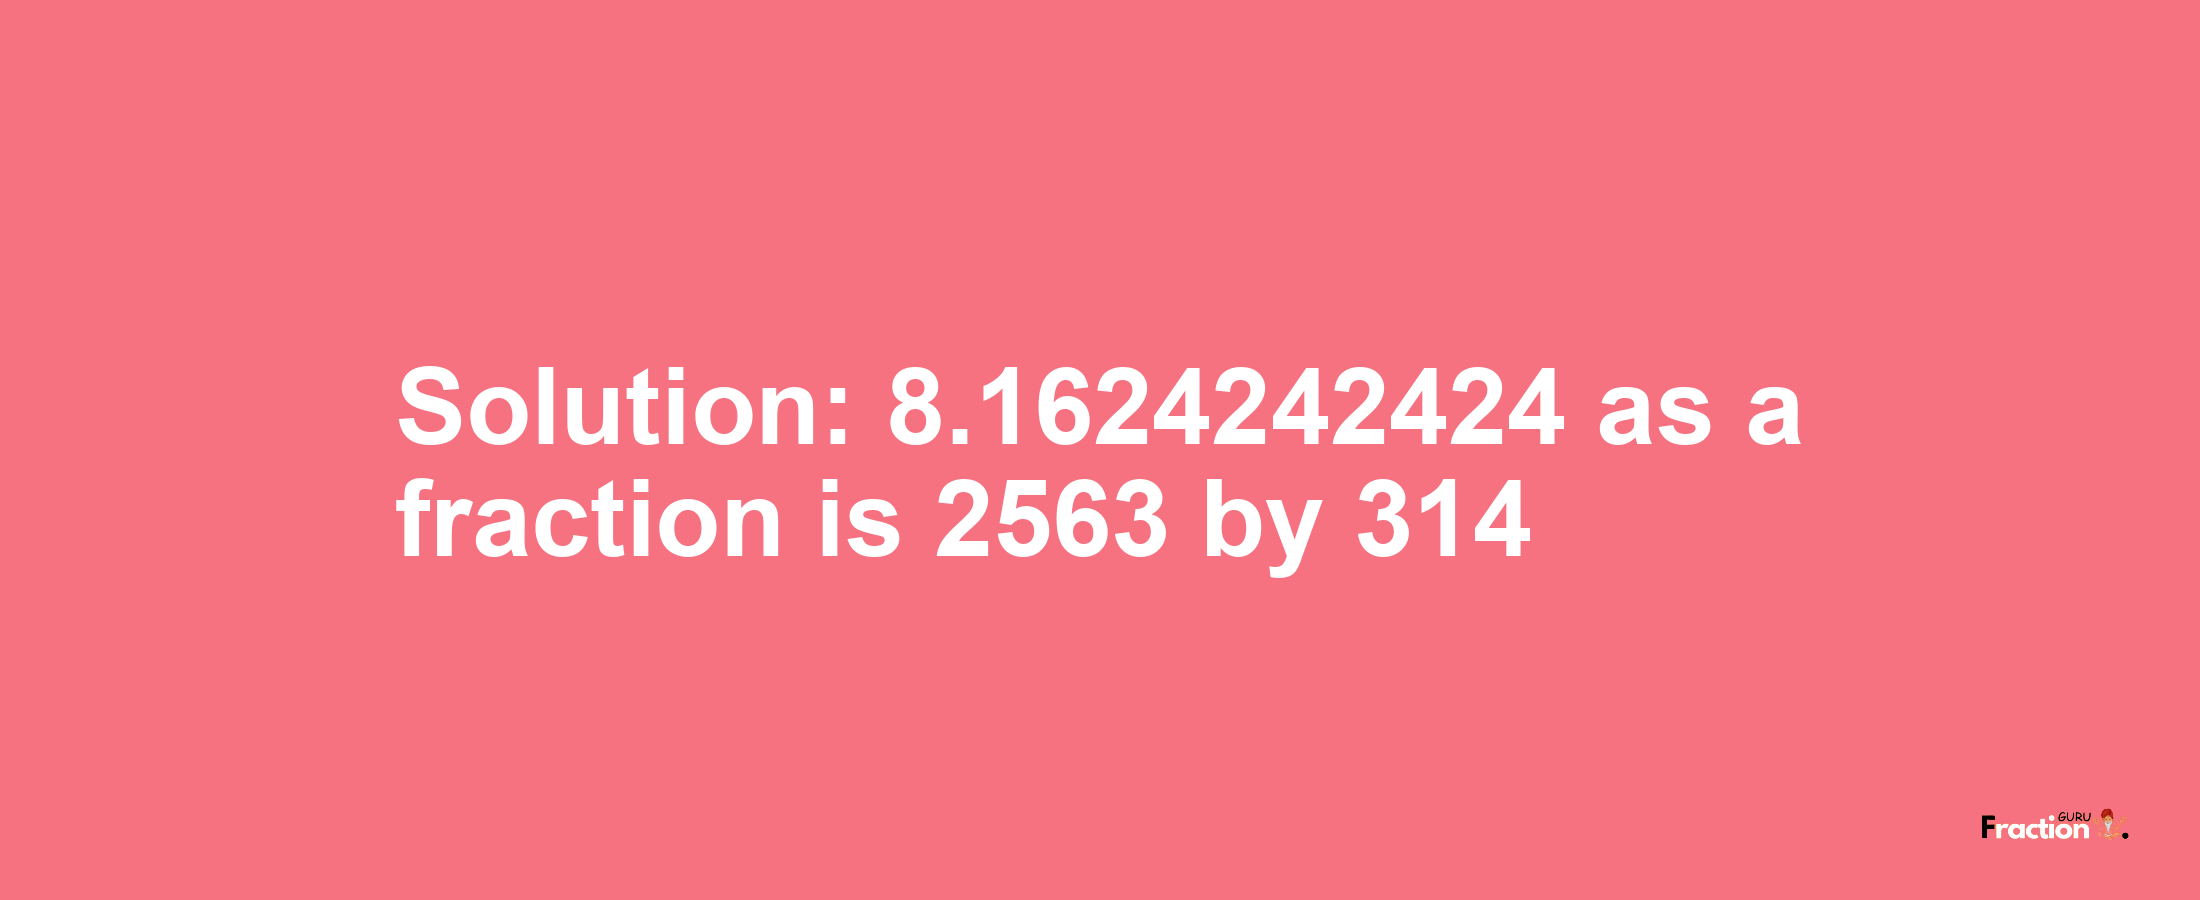 Solution:8.1624242424 as a fraction is 2563/314